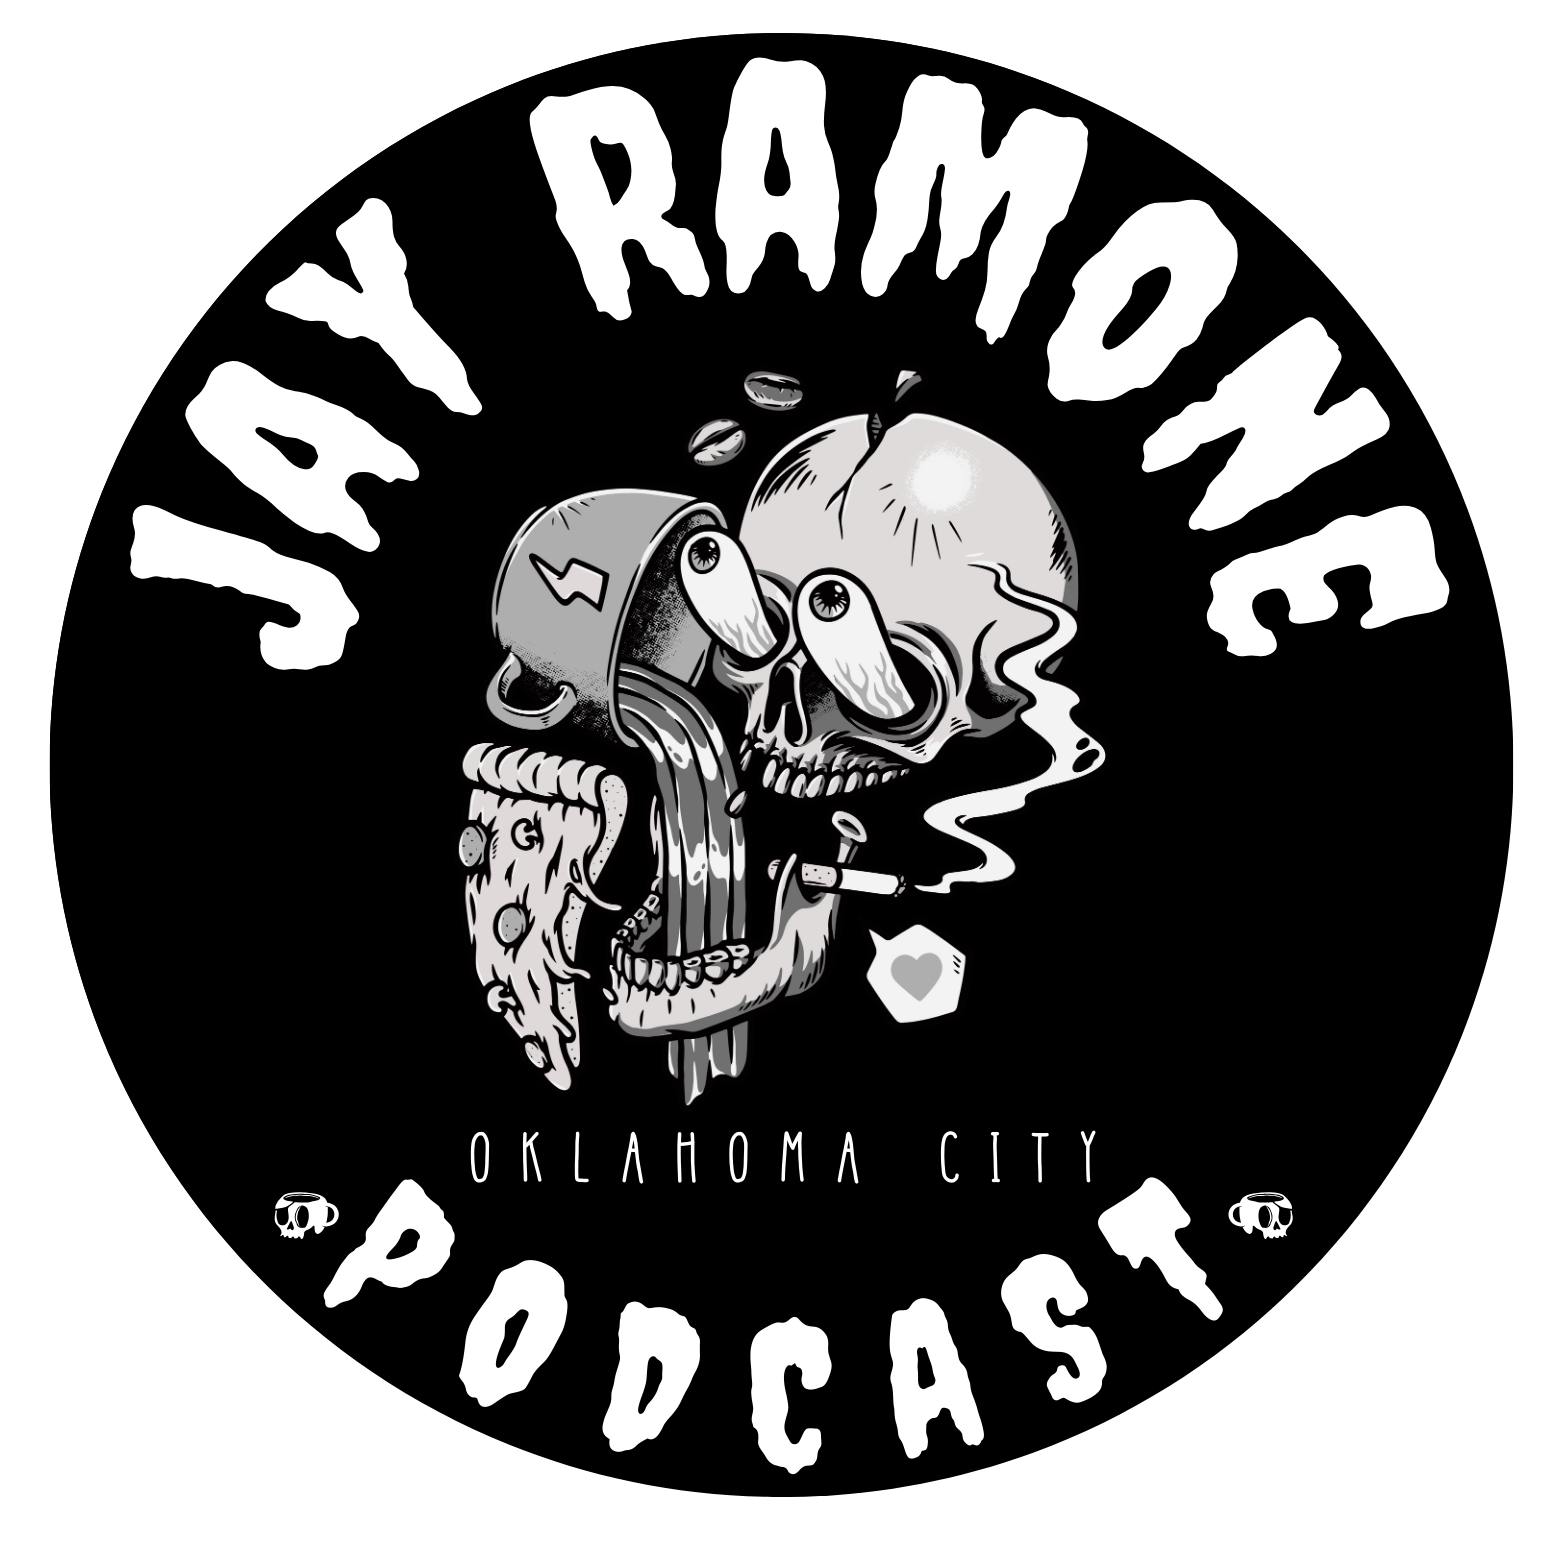 Squid Games - The Challenge - #422 aka Riley Hahn from Soul Crisis joins The Jay Ramone Podcast to discuss the show & music...